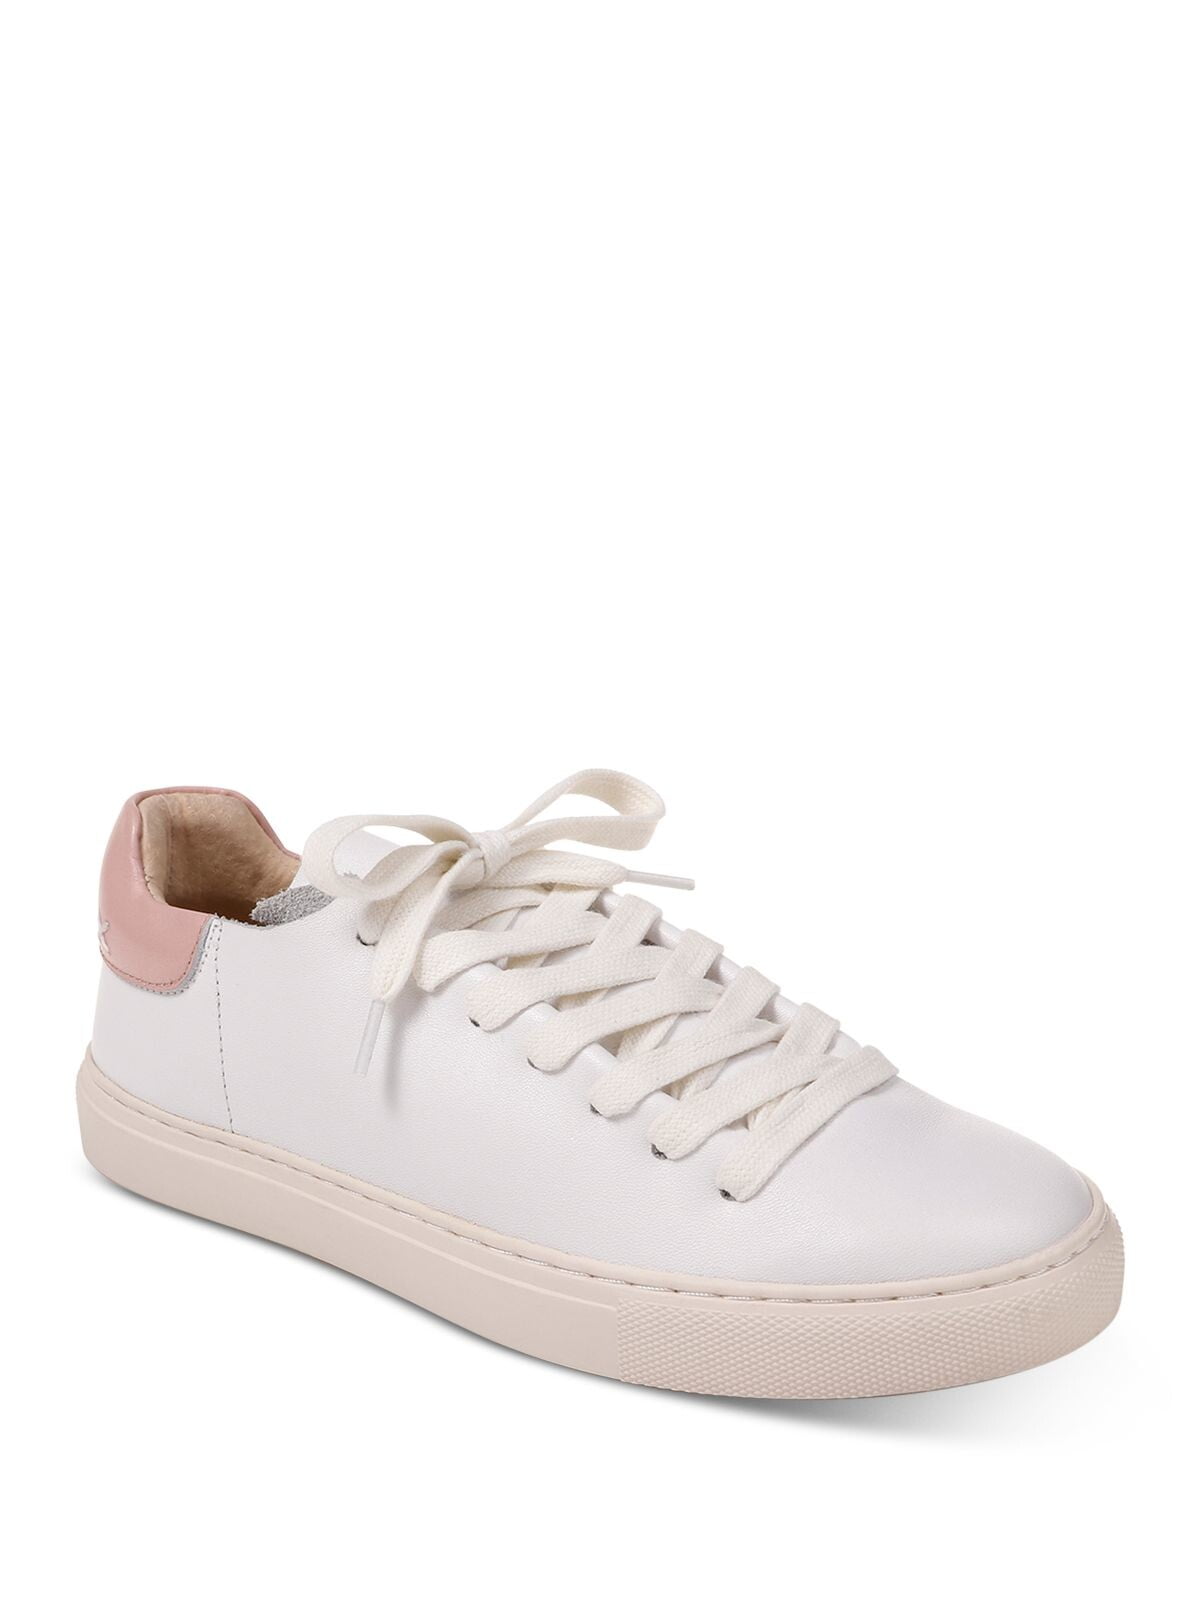 Coach Women's US 11 Clip Signature Canvas Low Top Sneakers Optic White/Petunia  for sale online | eBay